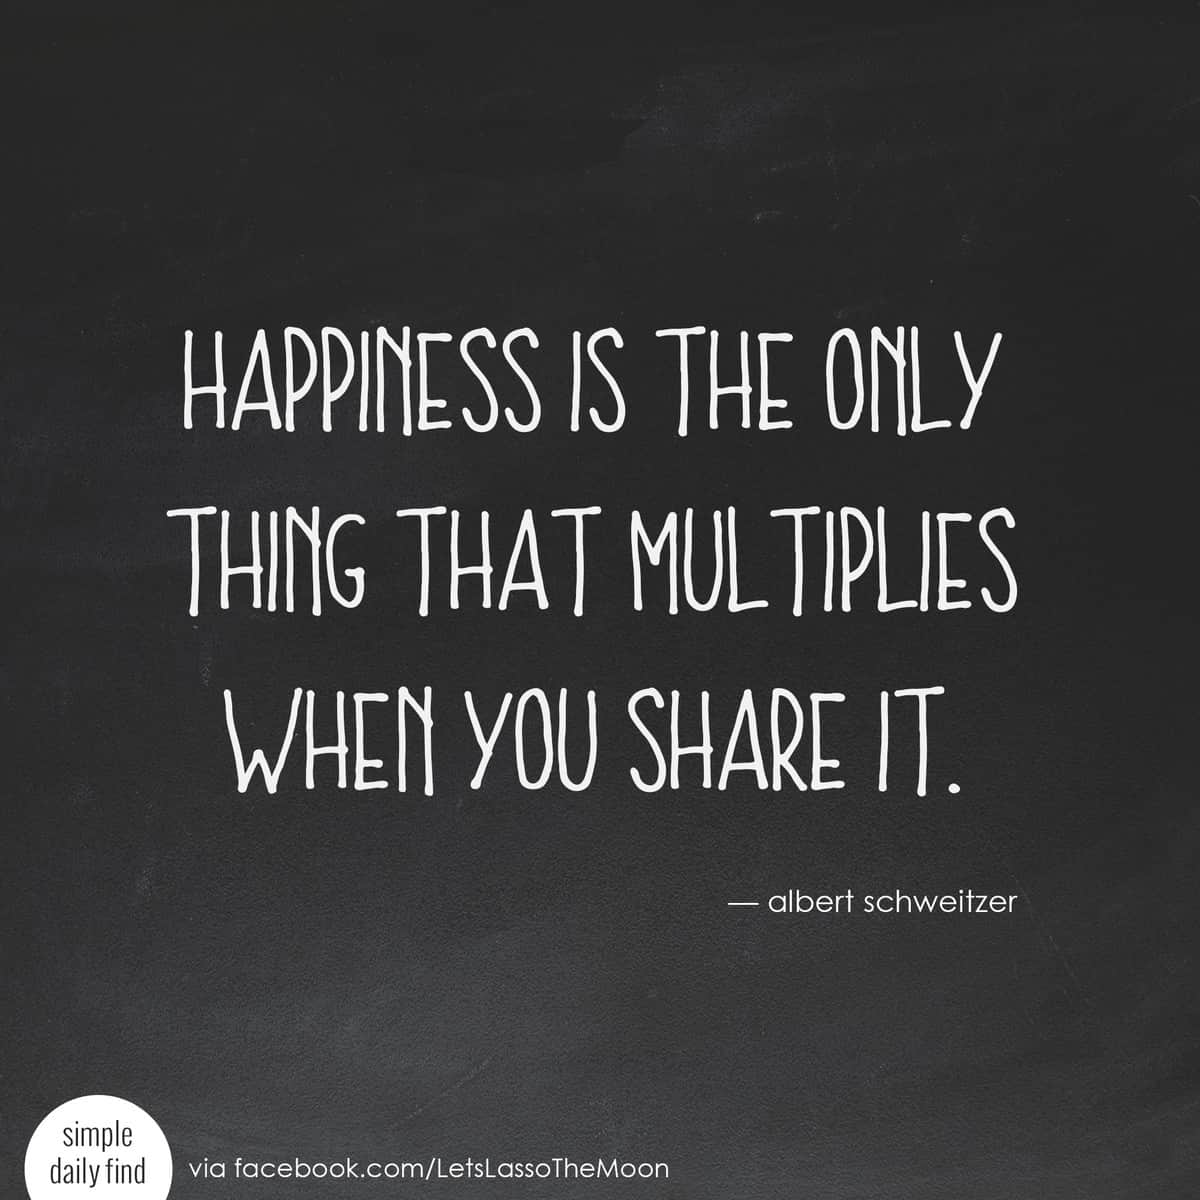 Happiness is the only thing that multiplies when you share it. - Albert Schweitzer *Love this quote and family gratitude project. Perfect for older kids! We are so doing this for Thanksgiving.